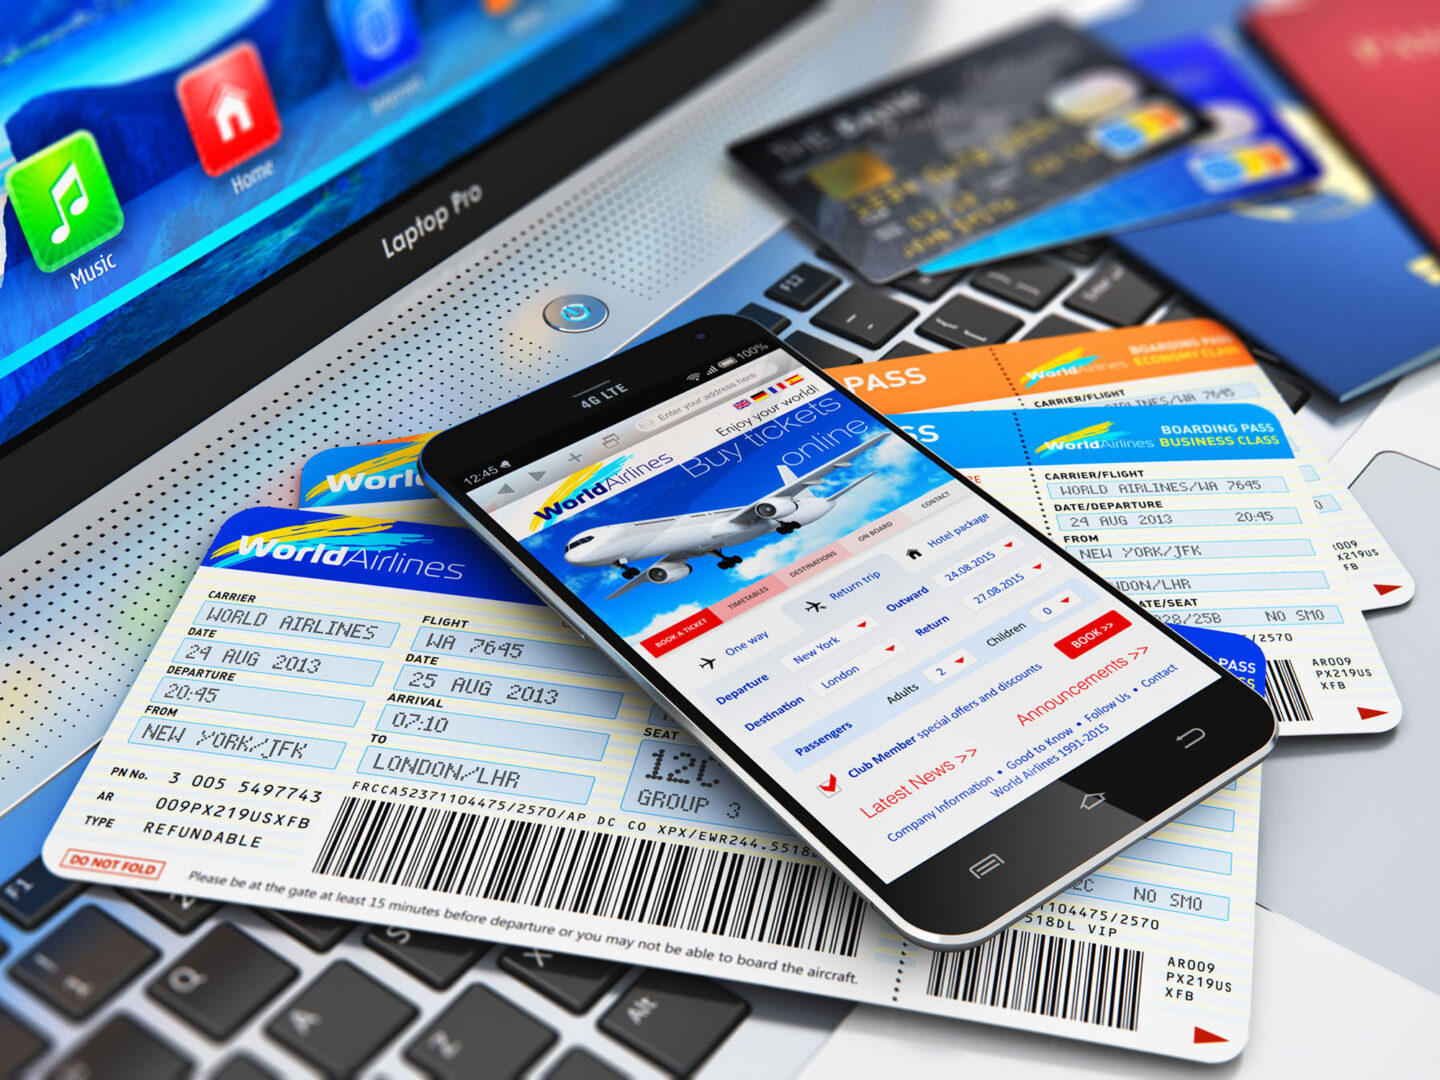 a smartphone placed on flight tickets